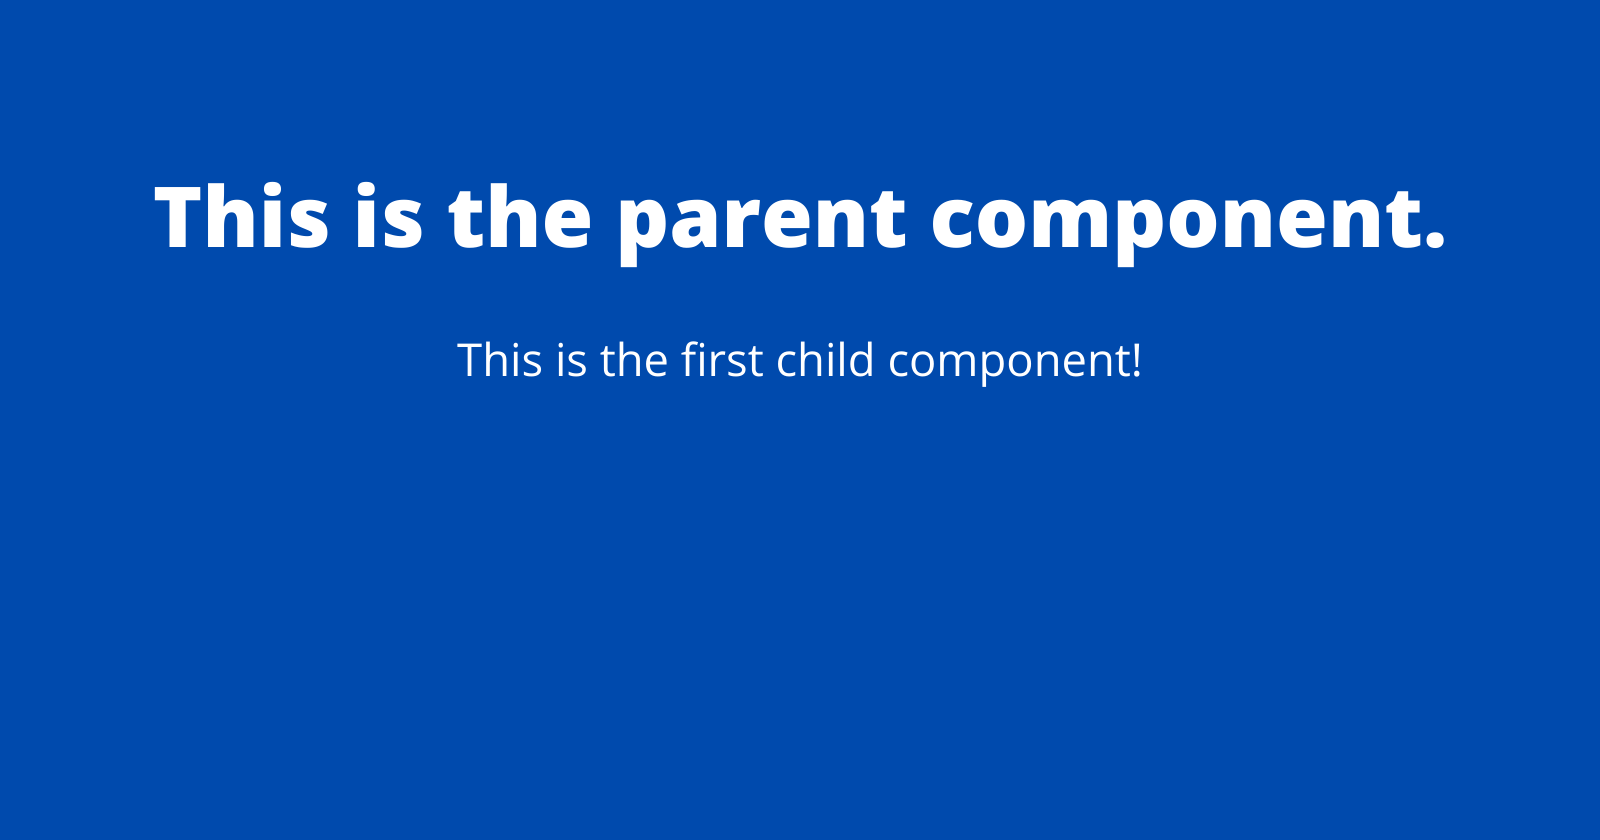 This is the parent component.png